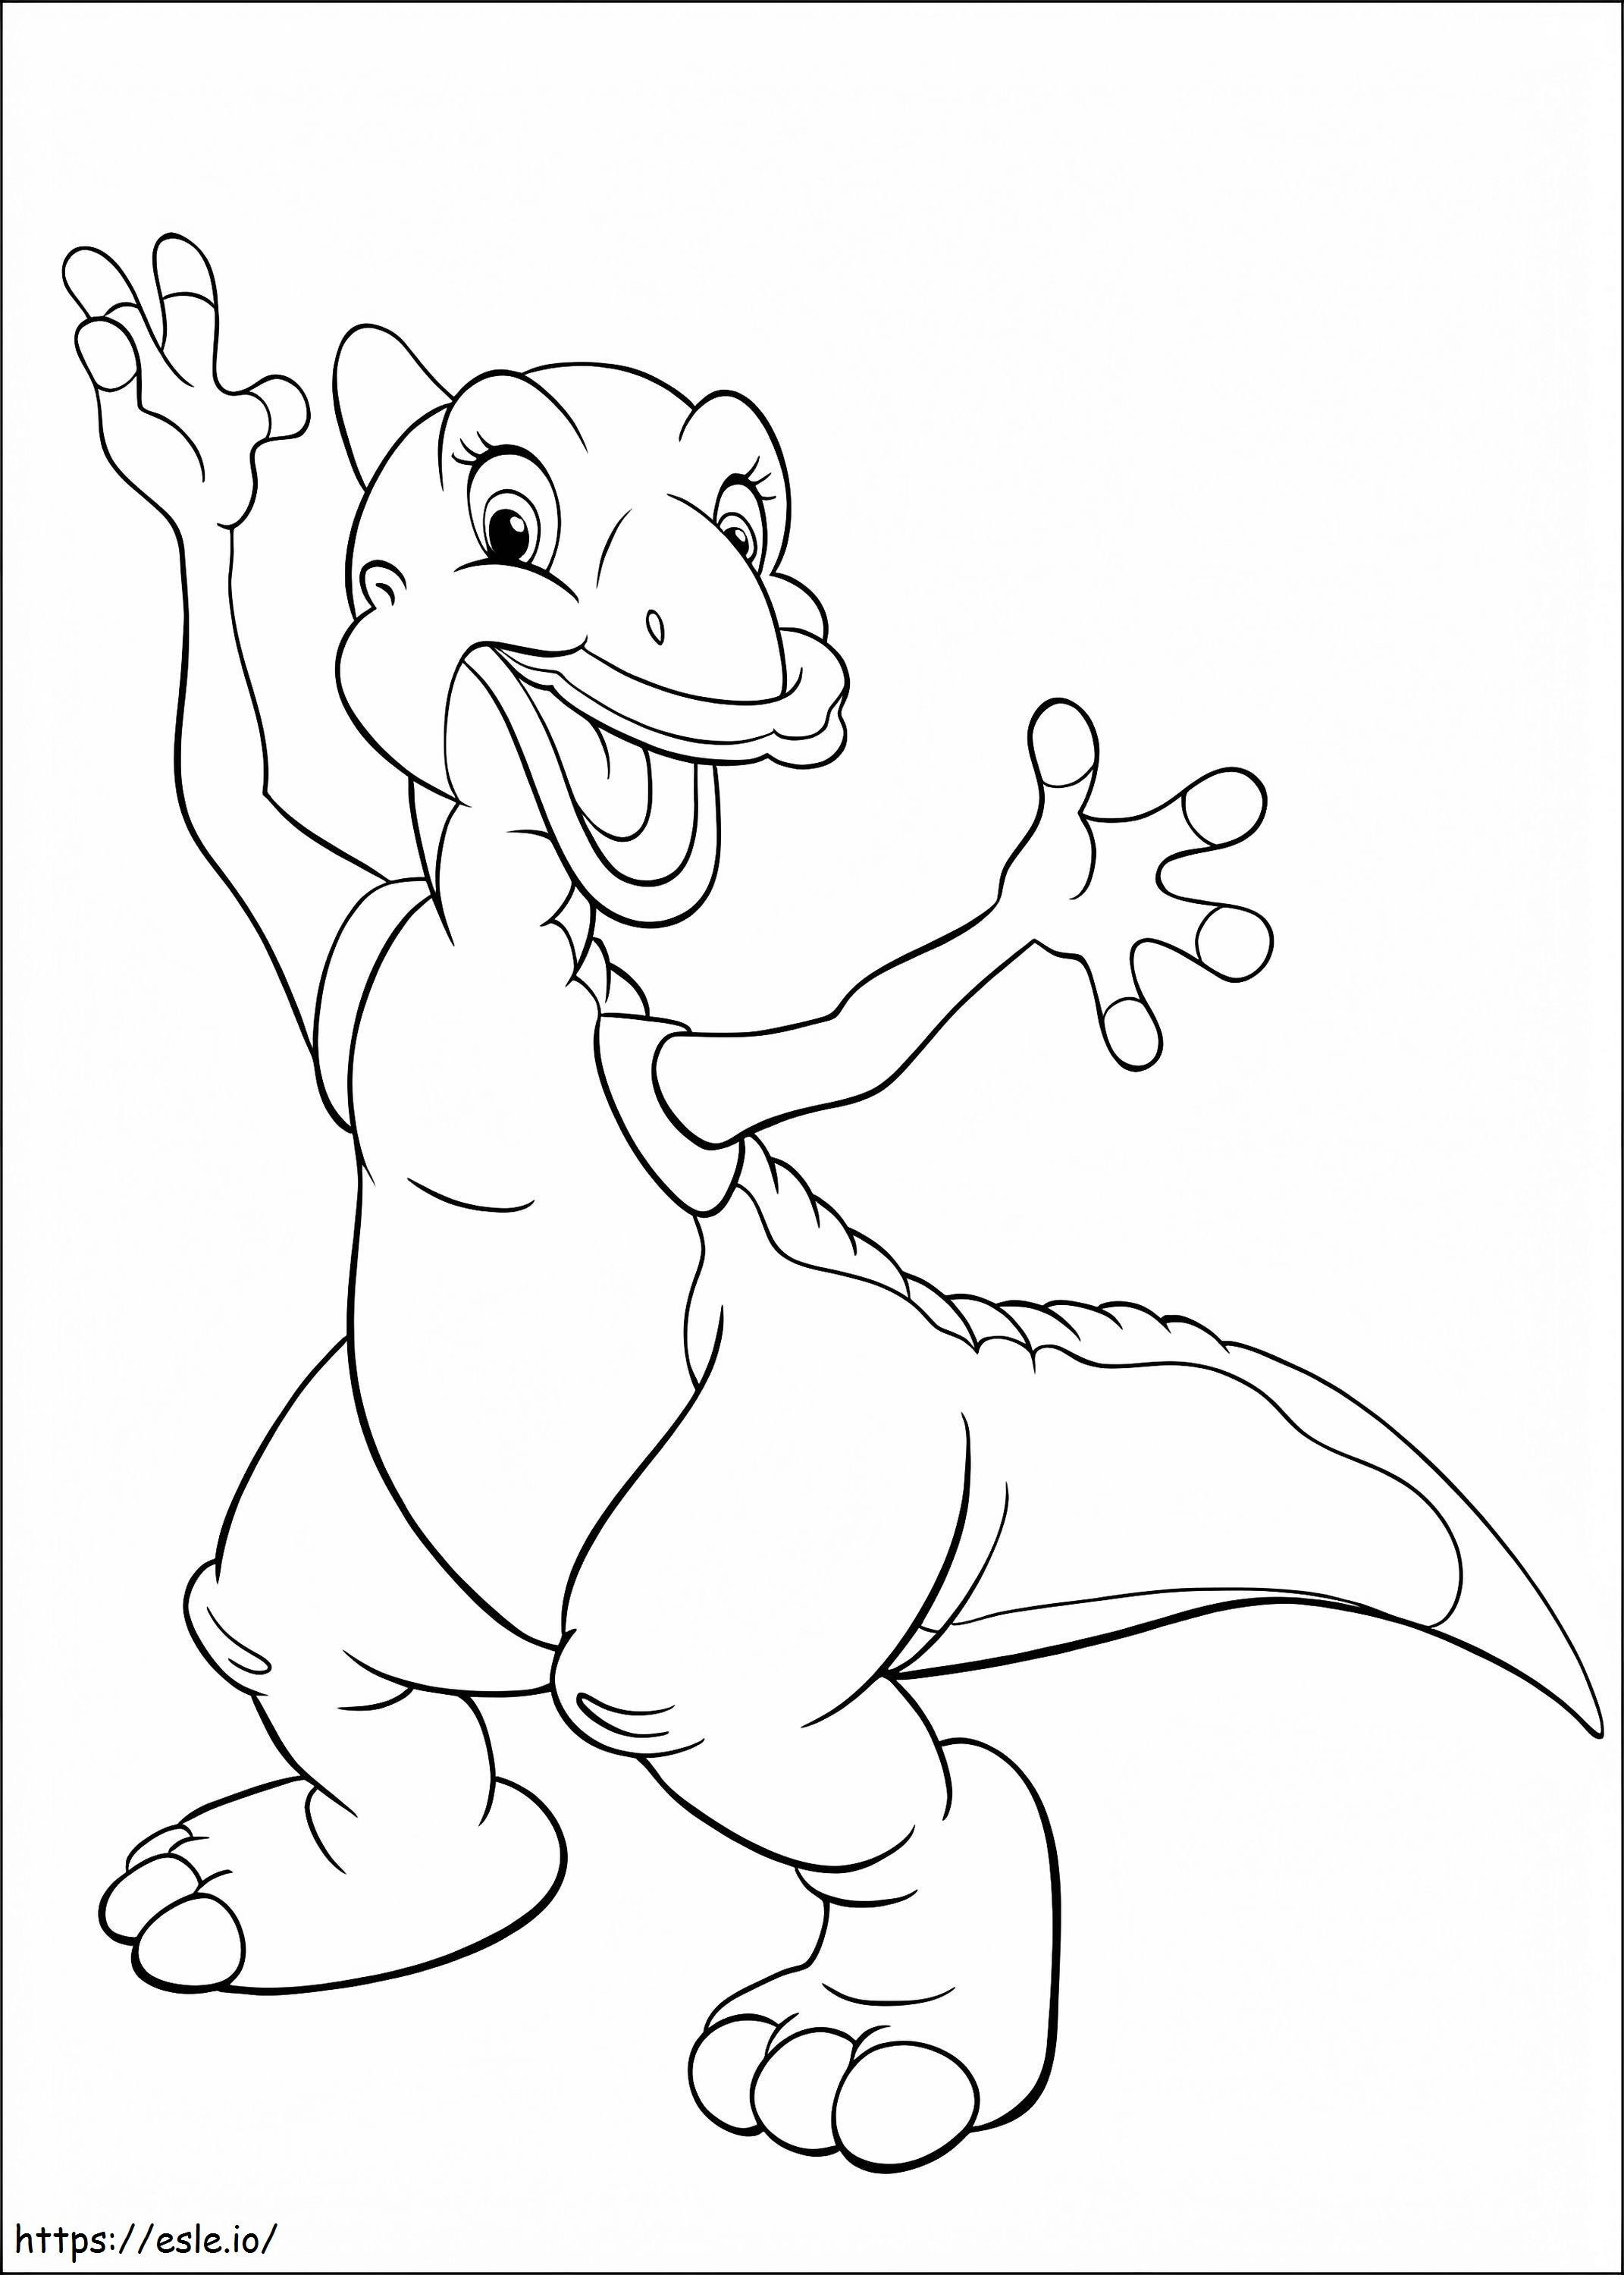 Ducky From Land Before Time coloring page